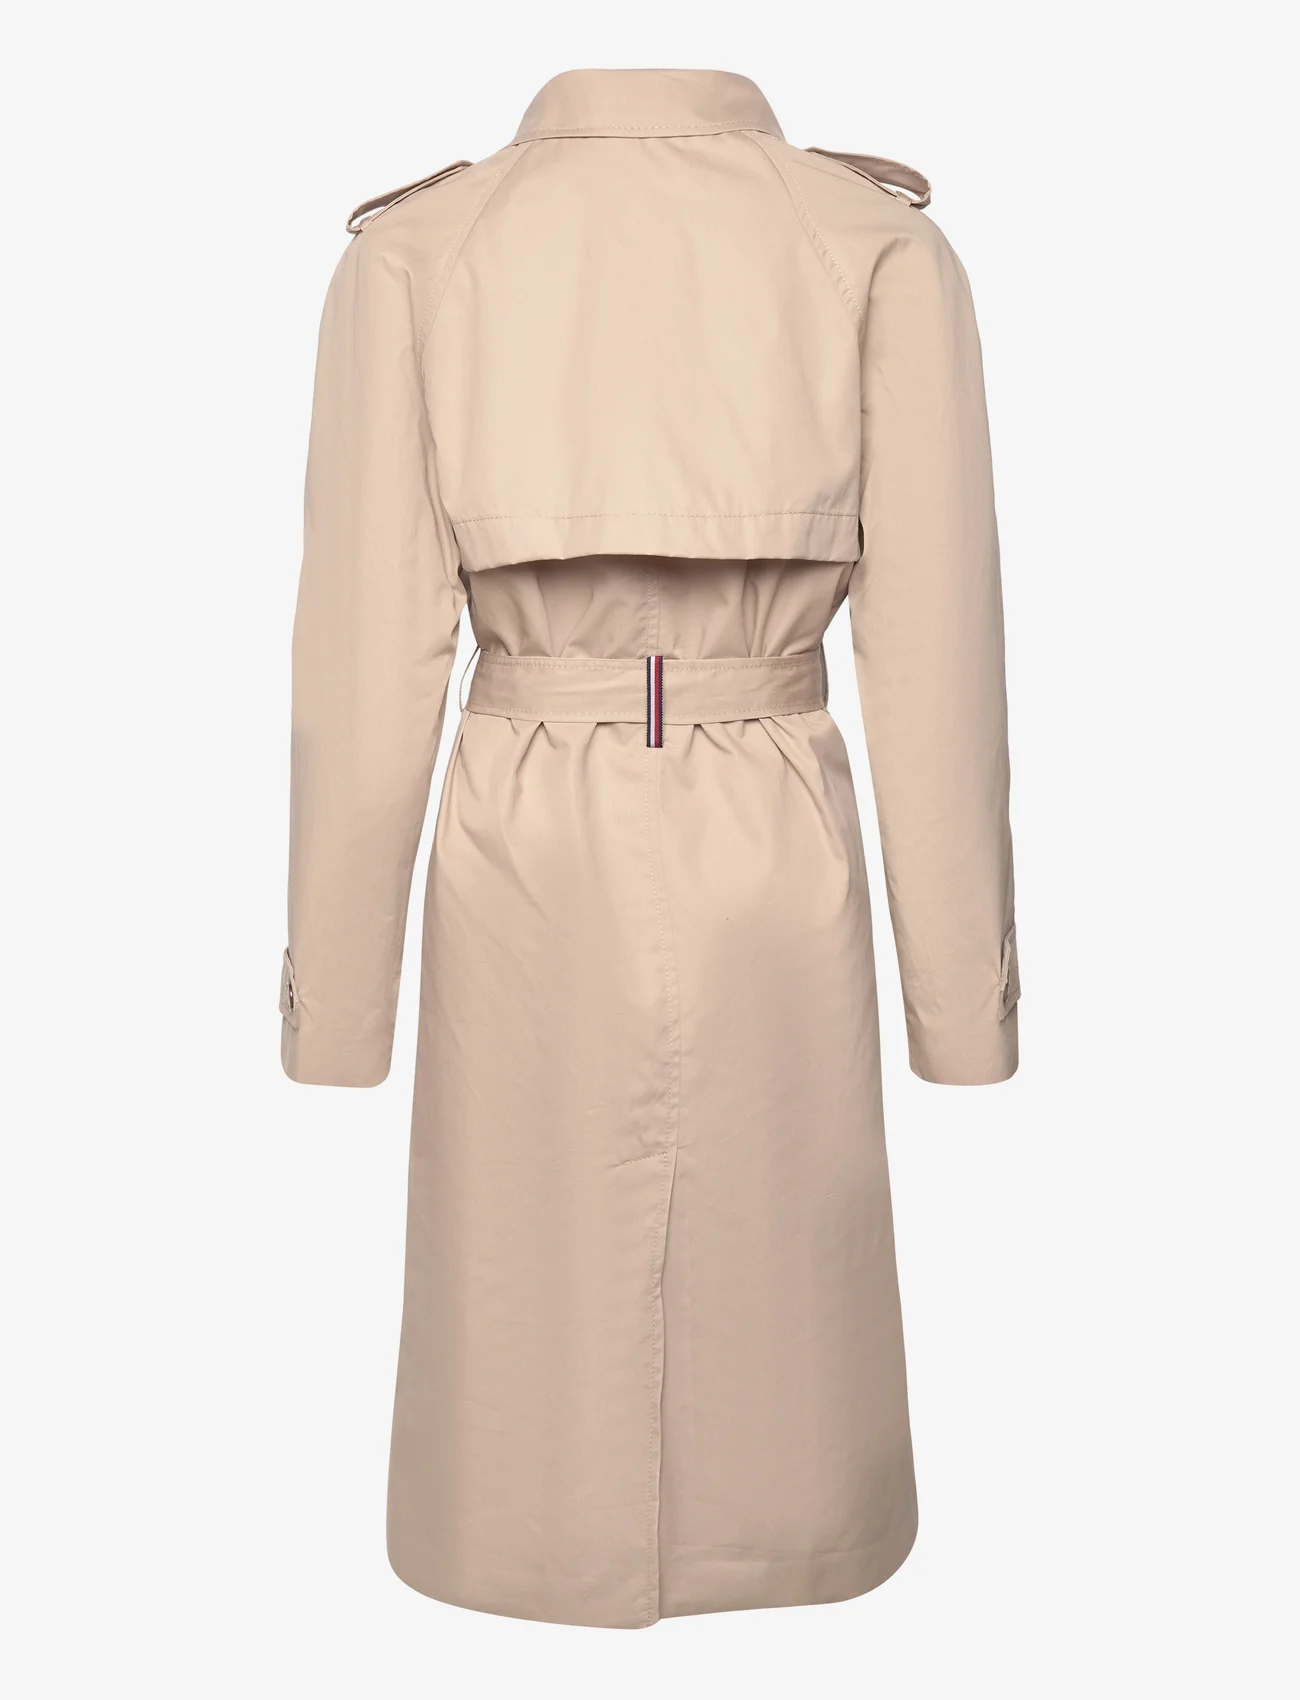 Tommy Hilfiger - COTTON CLASSIC TRENCH - kevättakit - beige - 1